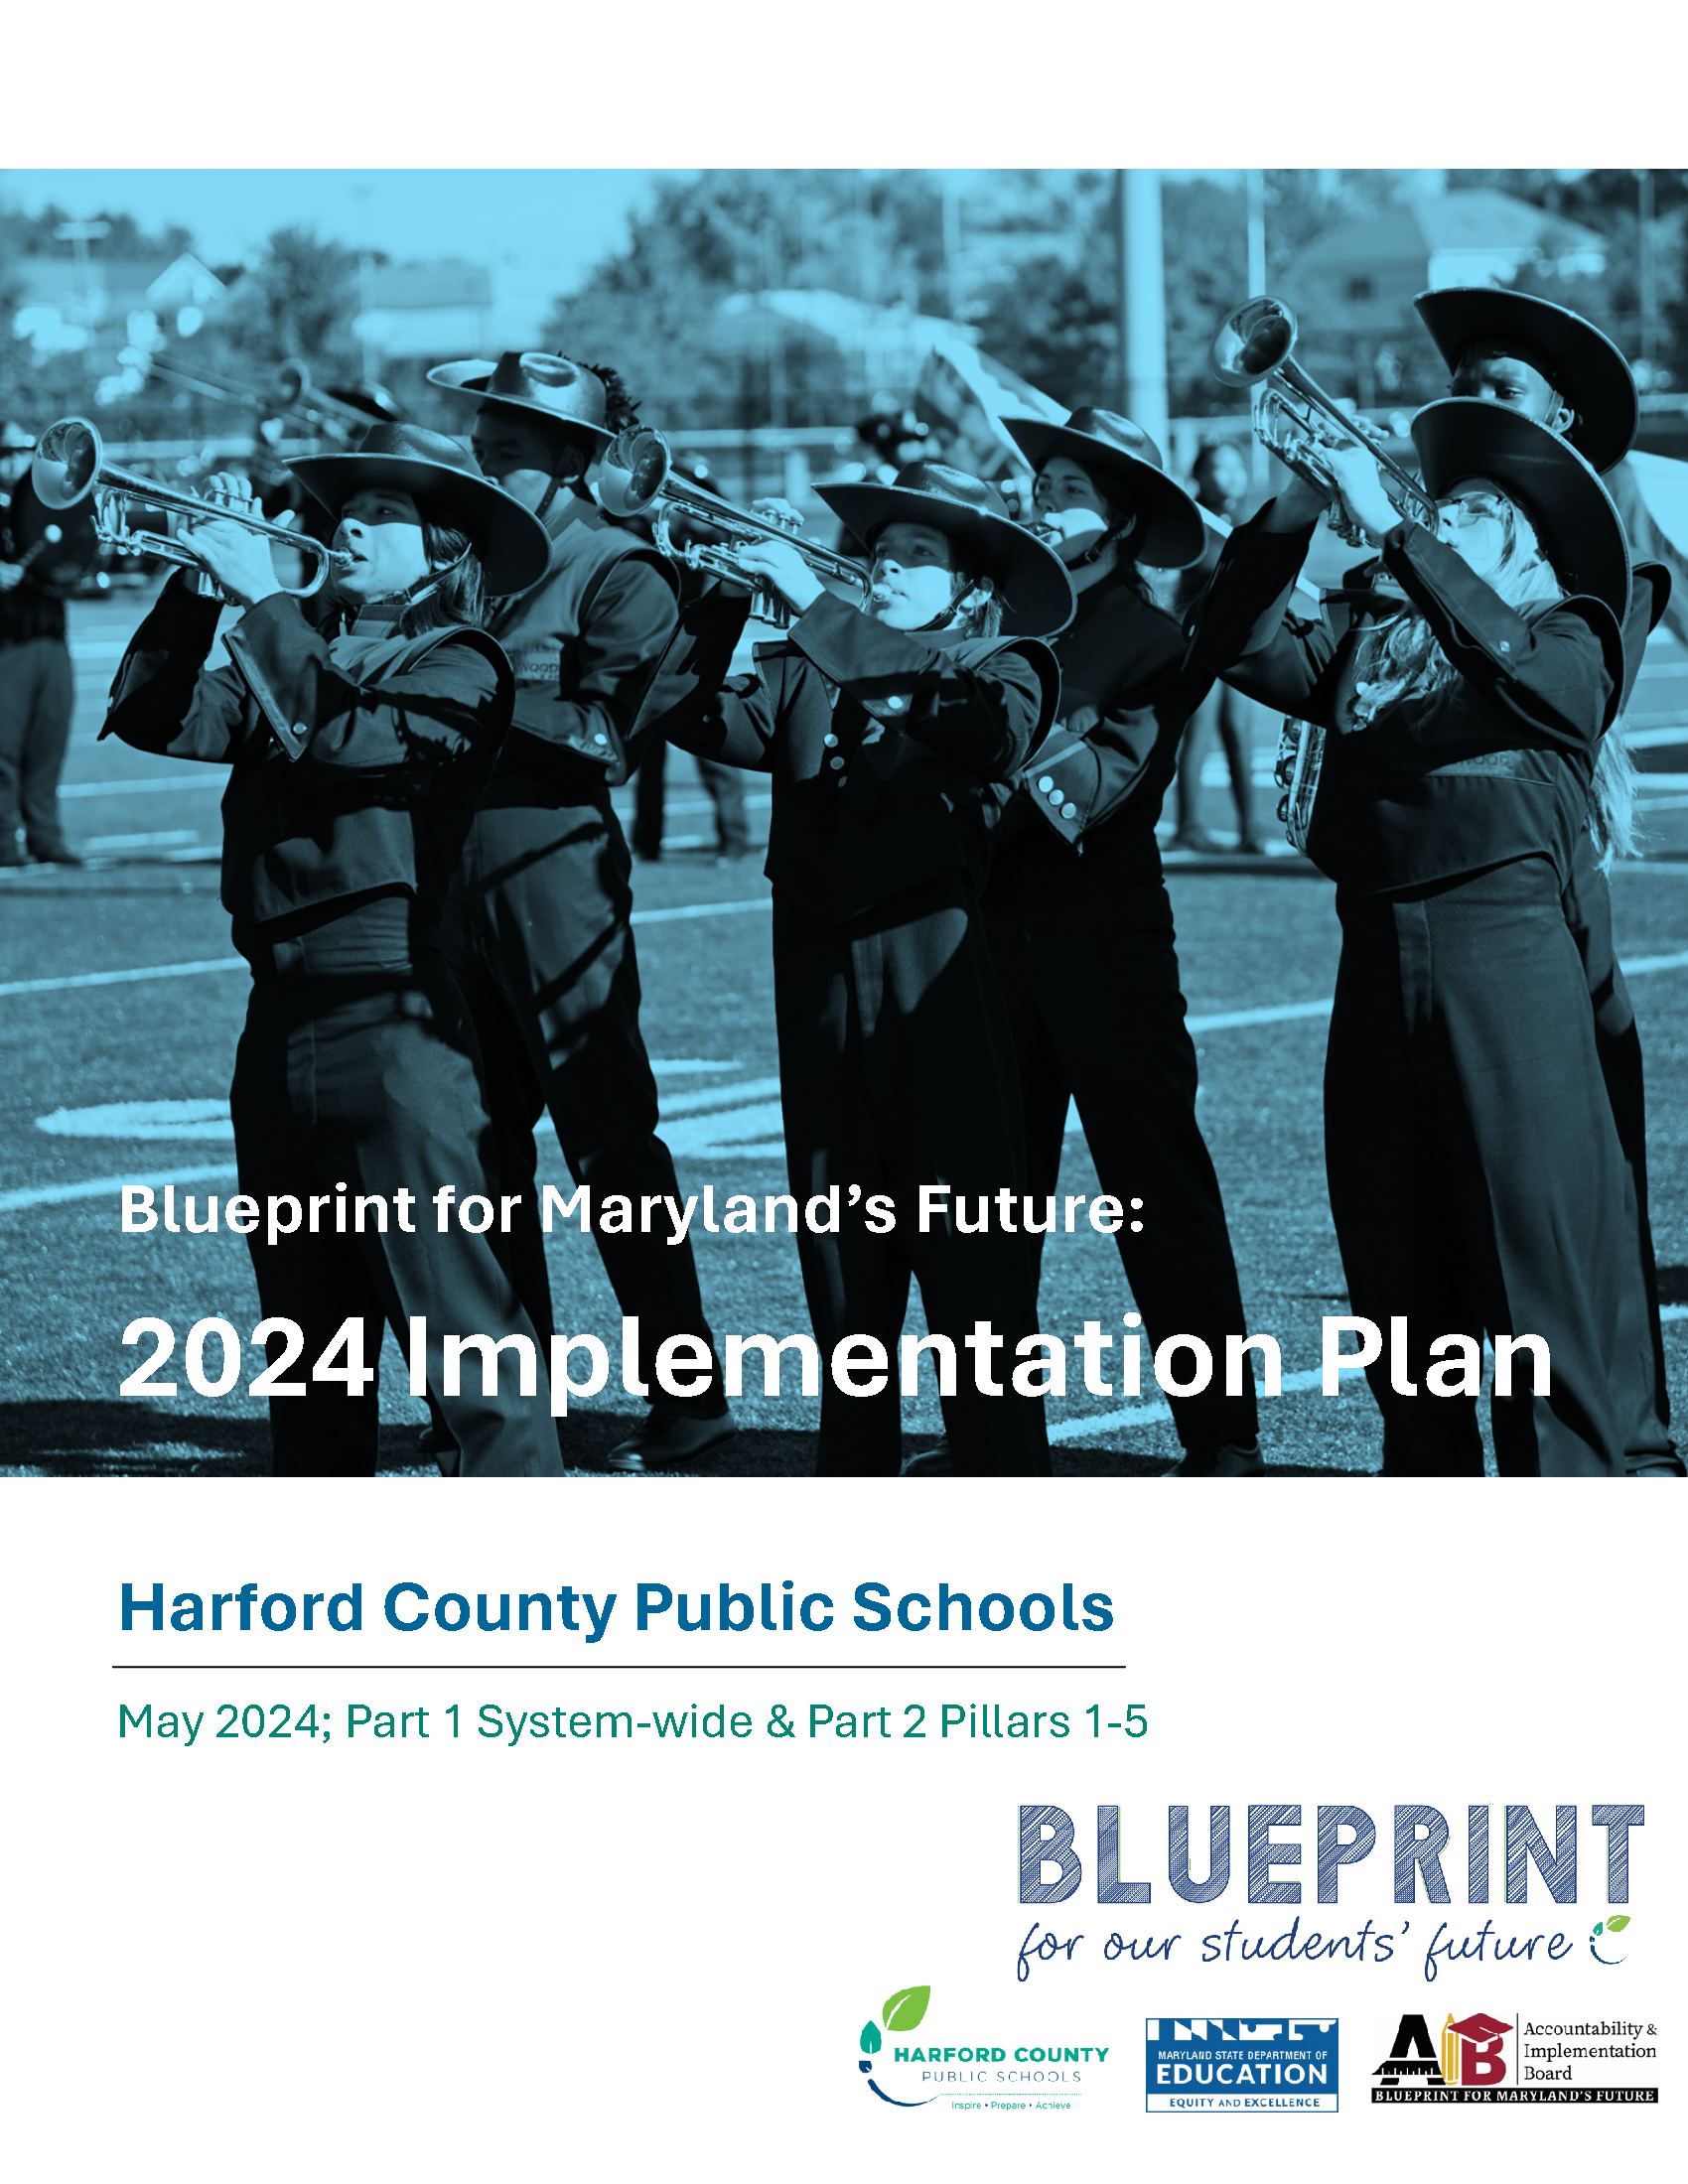 Blueprint Plan Preview front-image